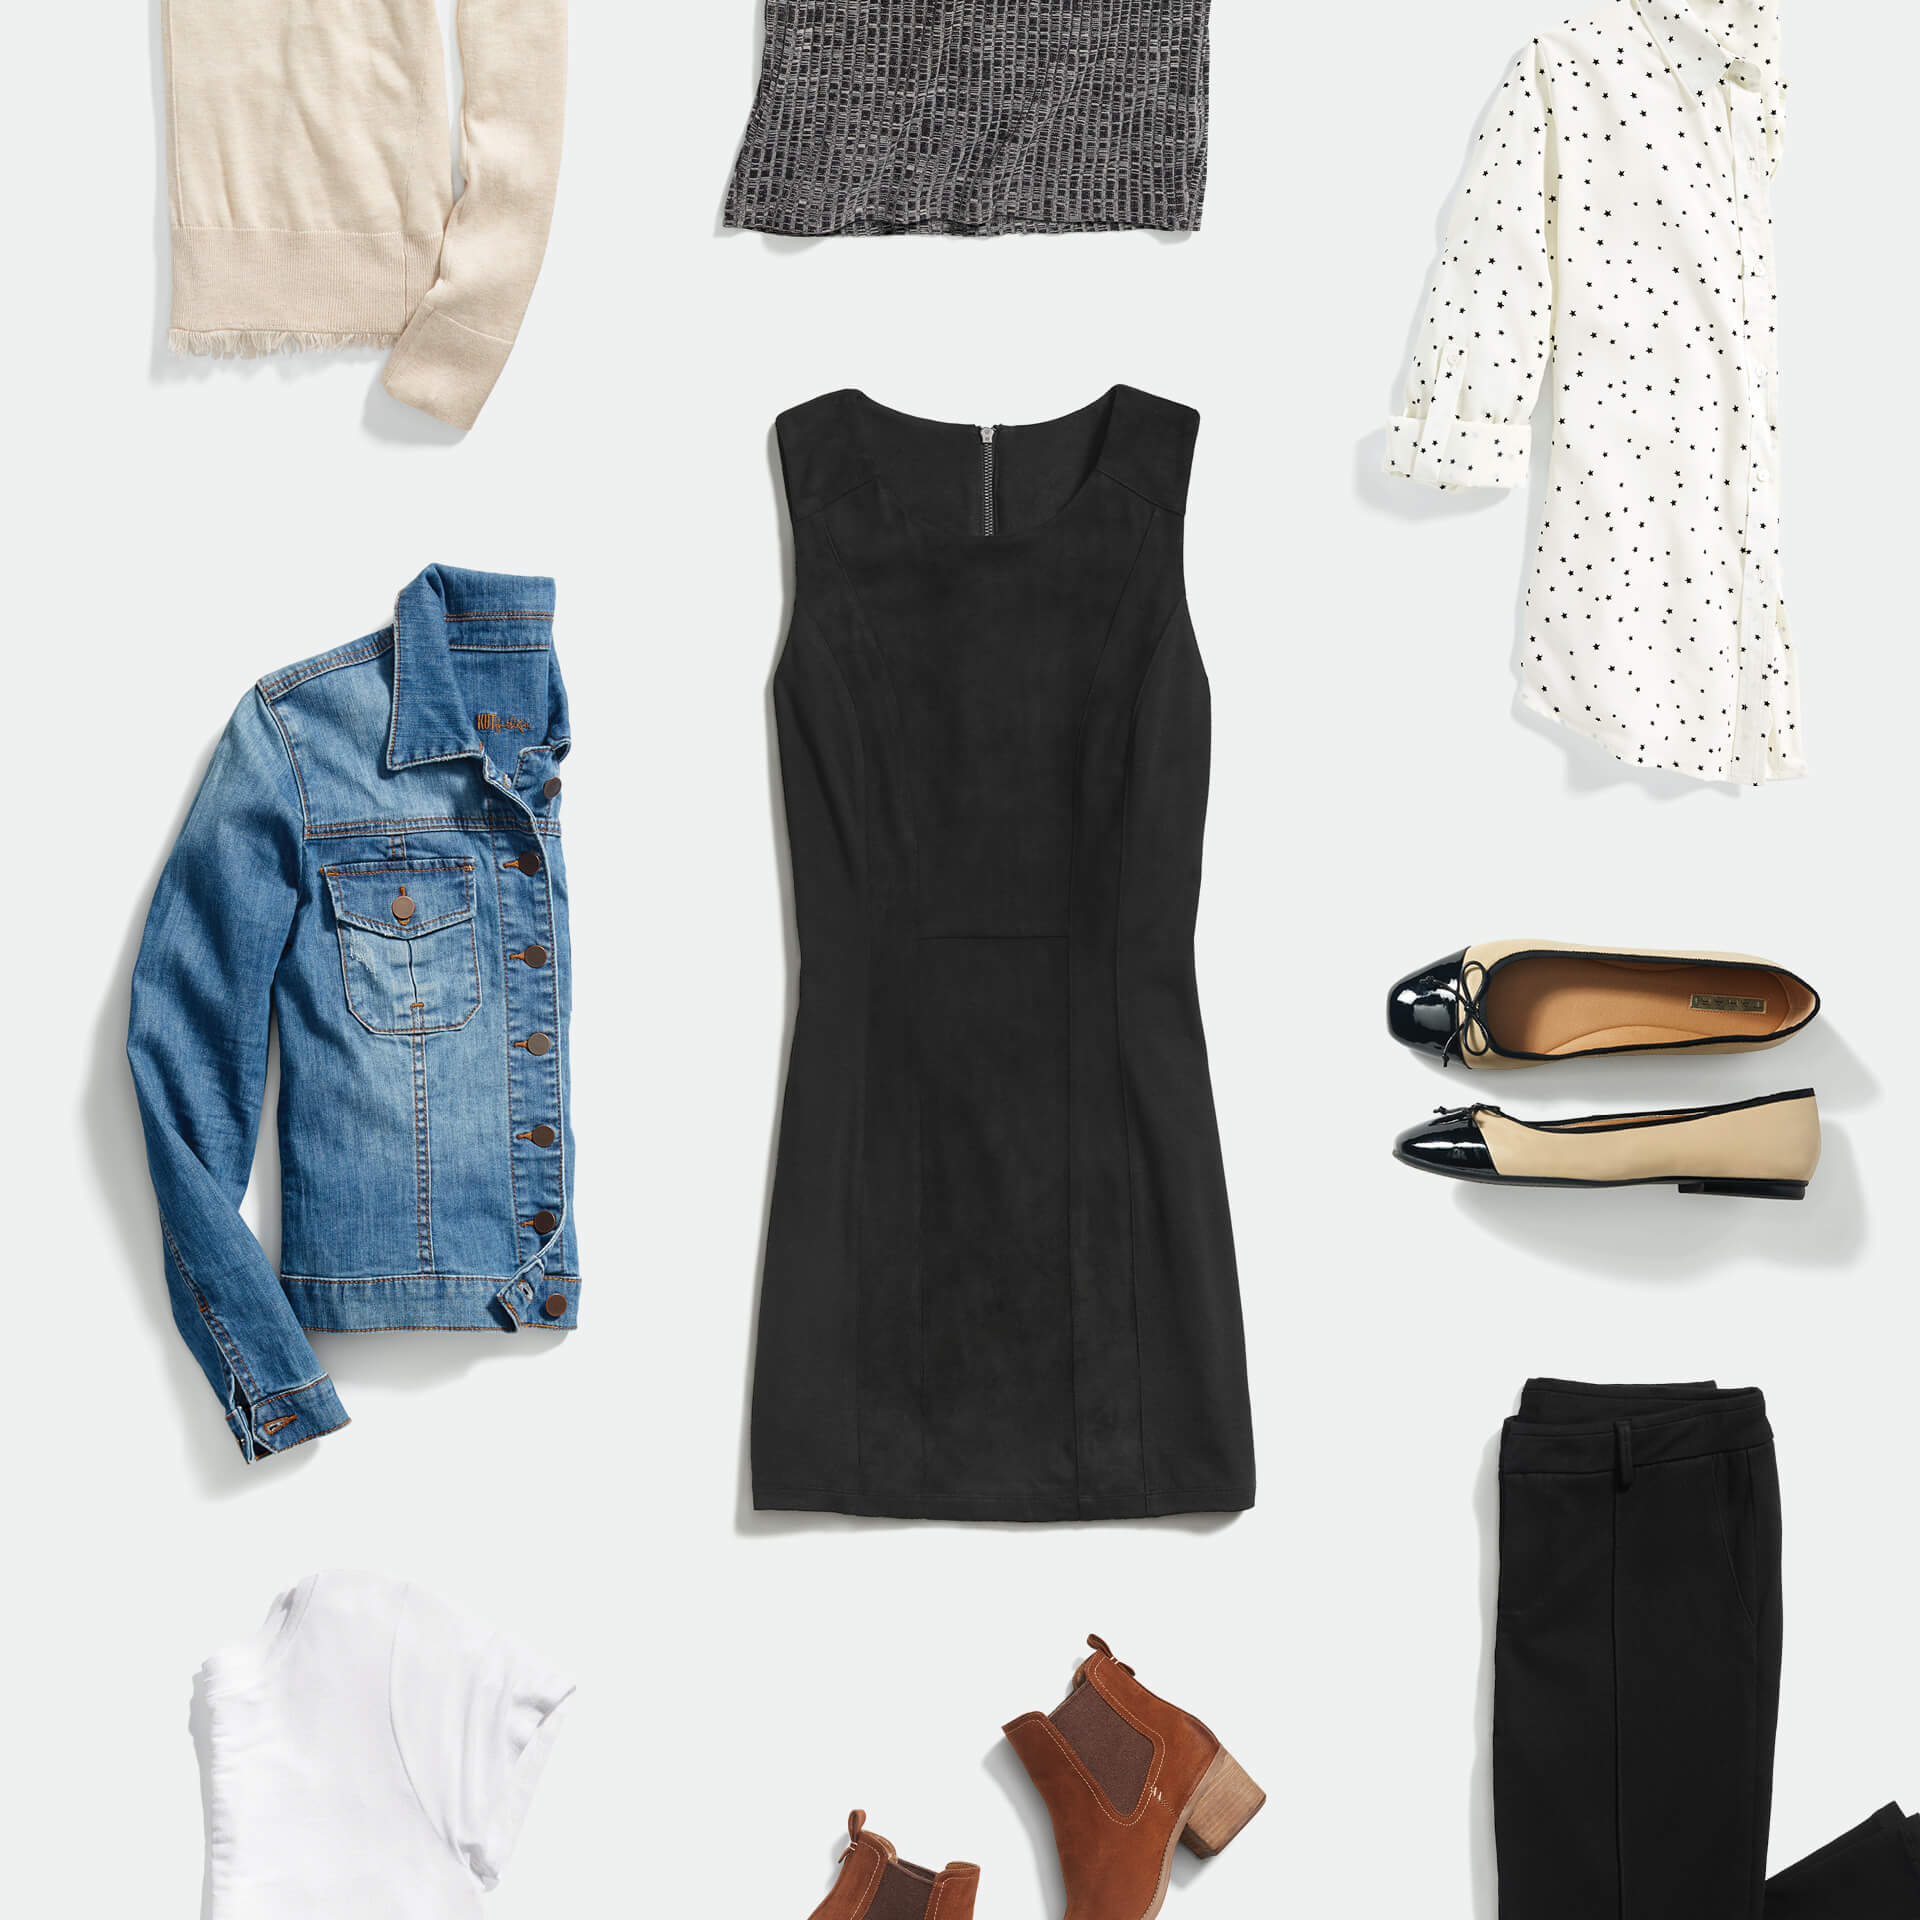 What are the basics clothes every girl should have in her closet